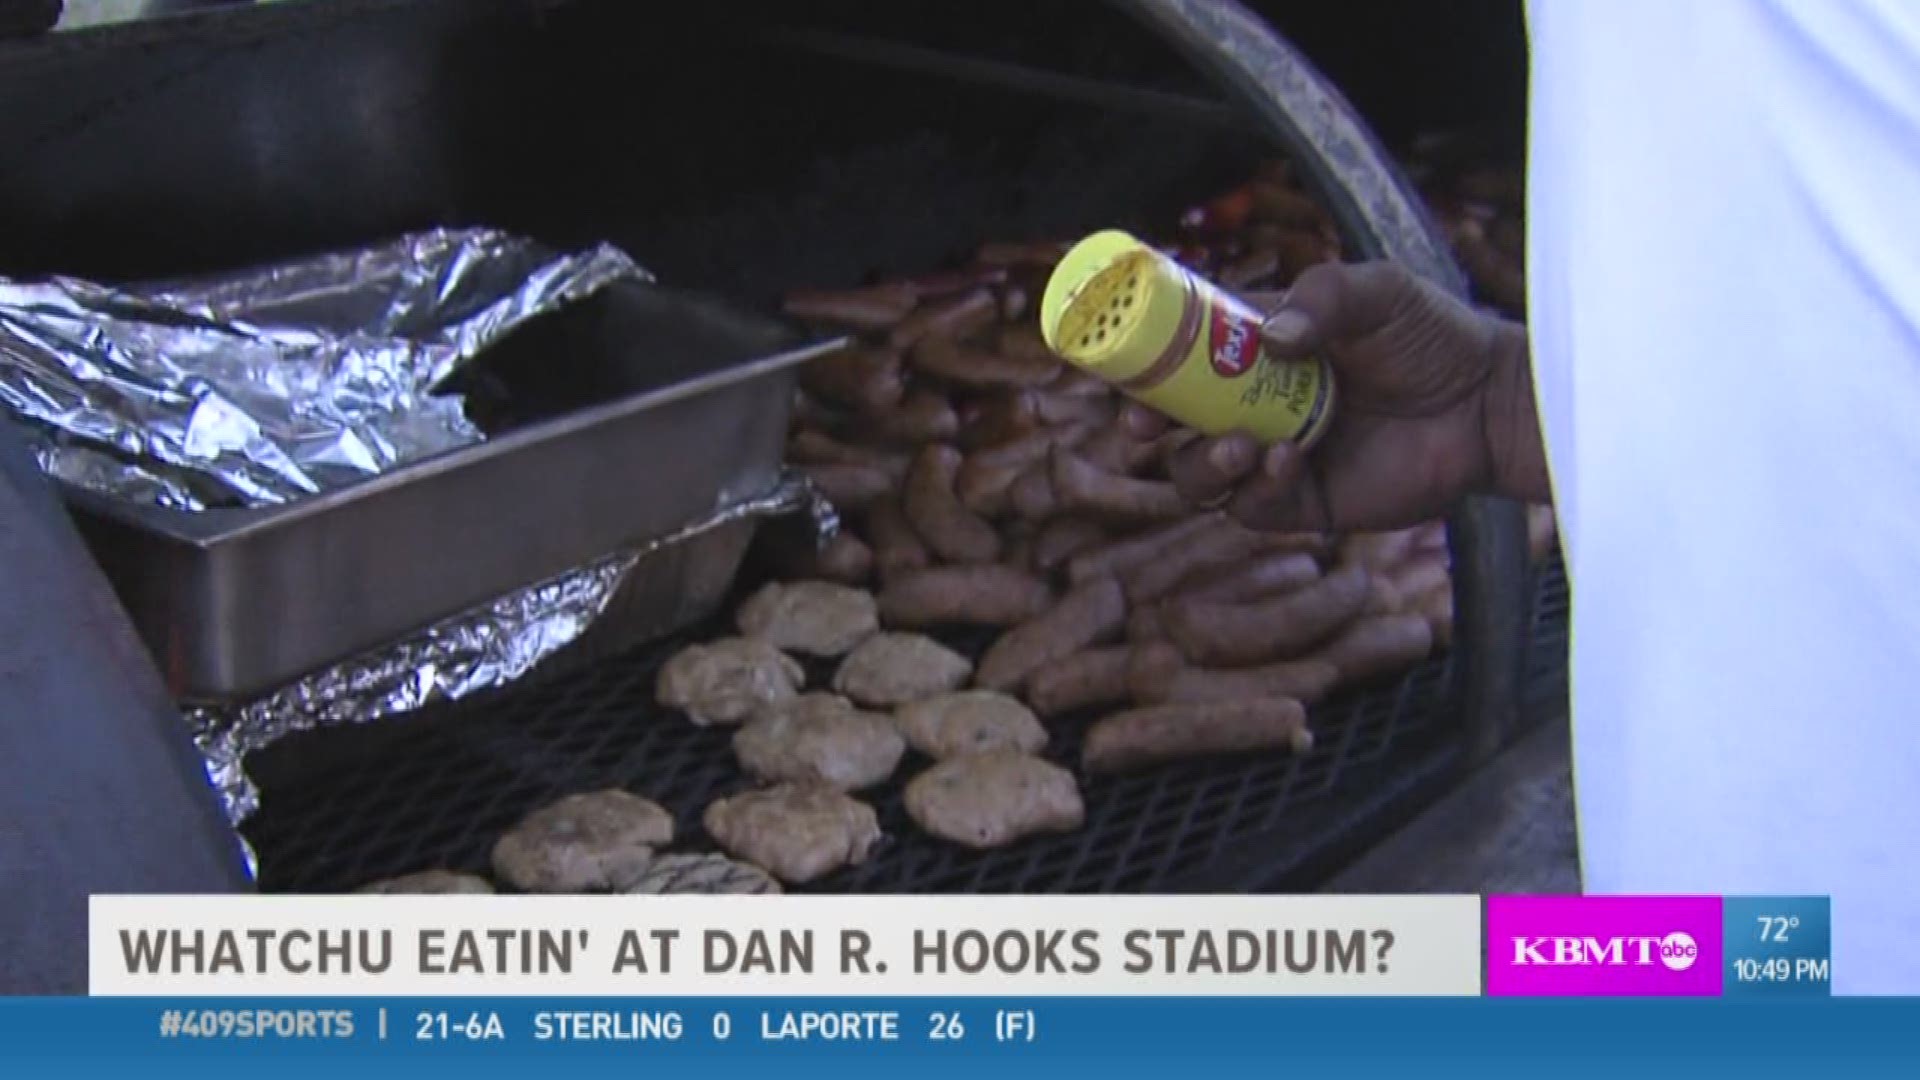 It's week 7 and 409Sports wants to know 'whatchu eatin'